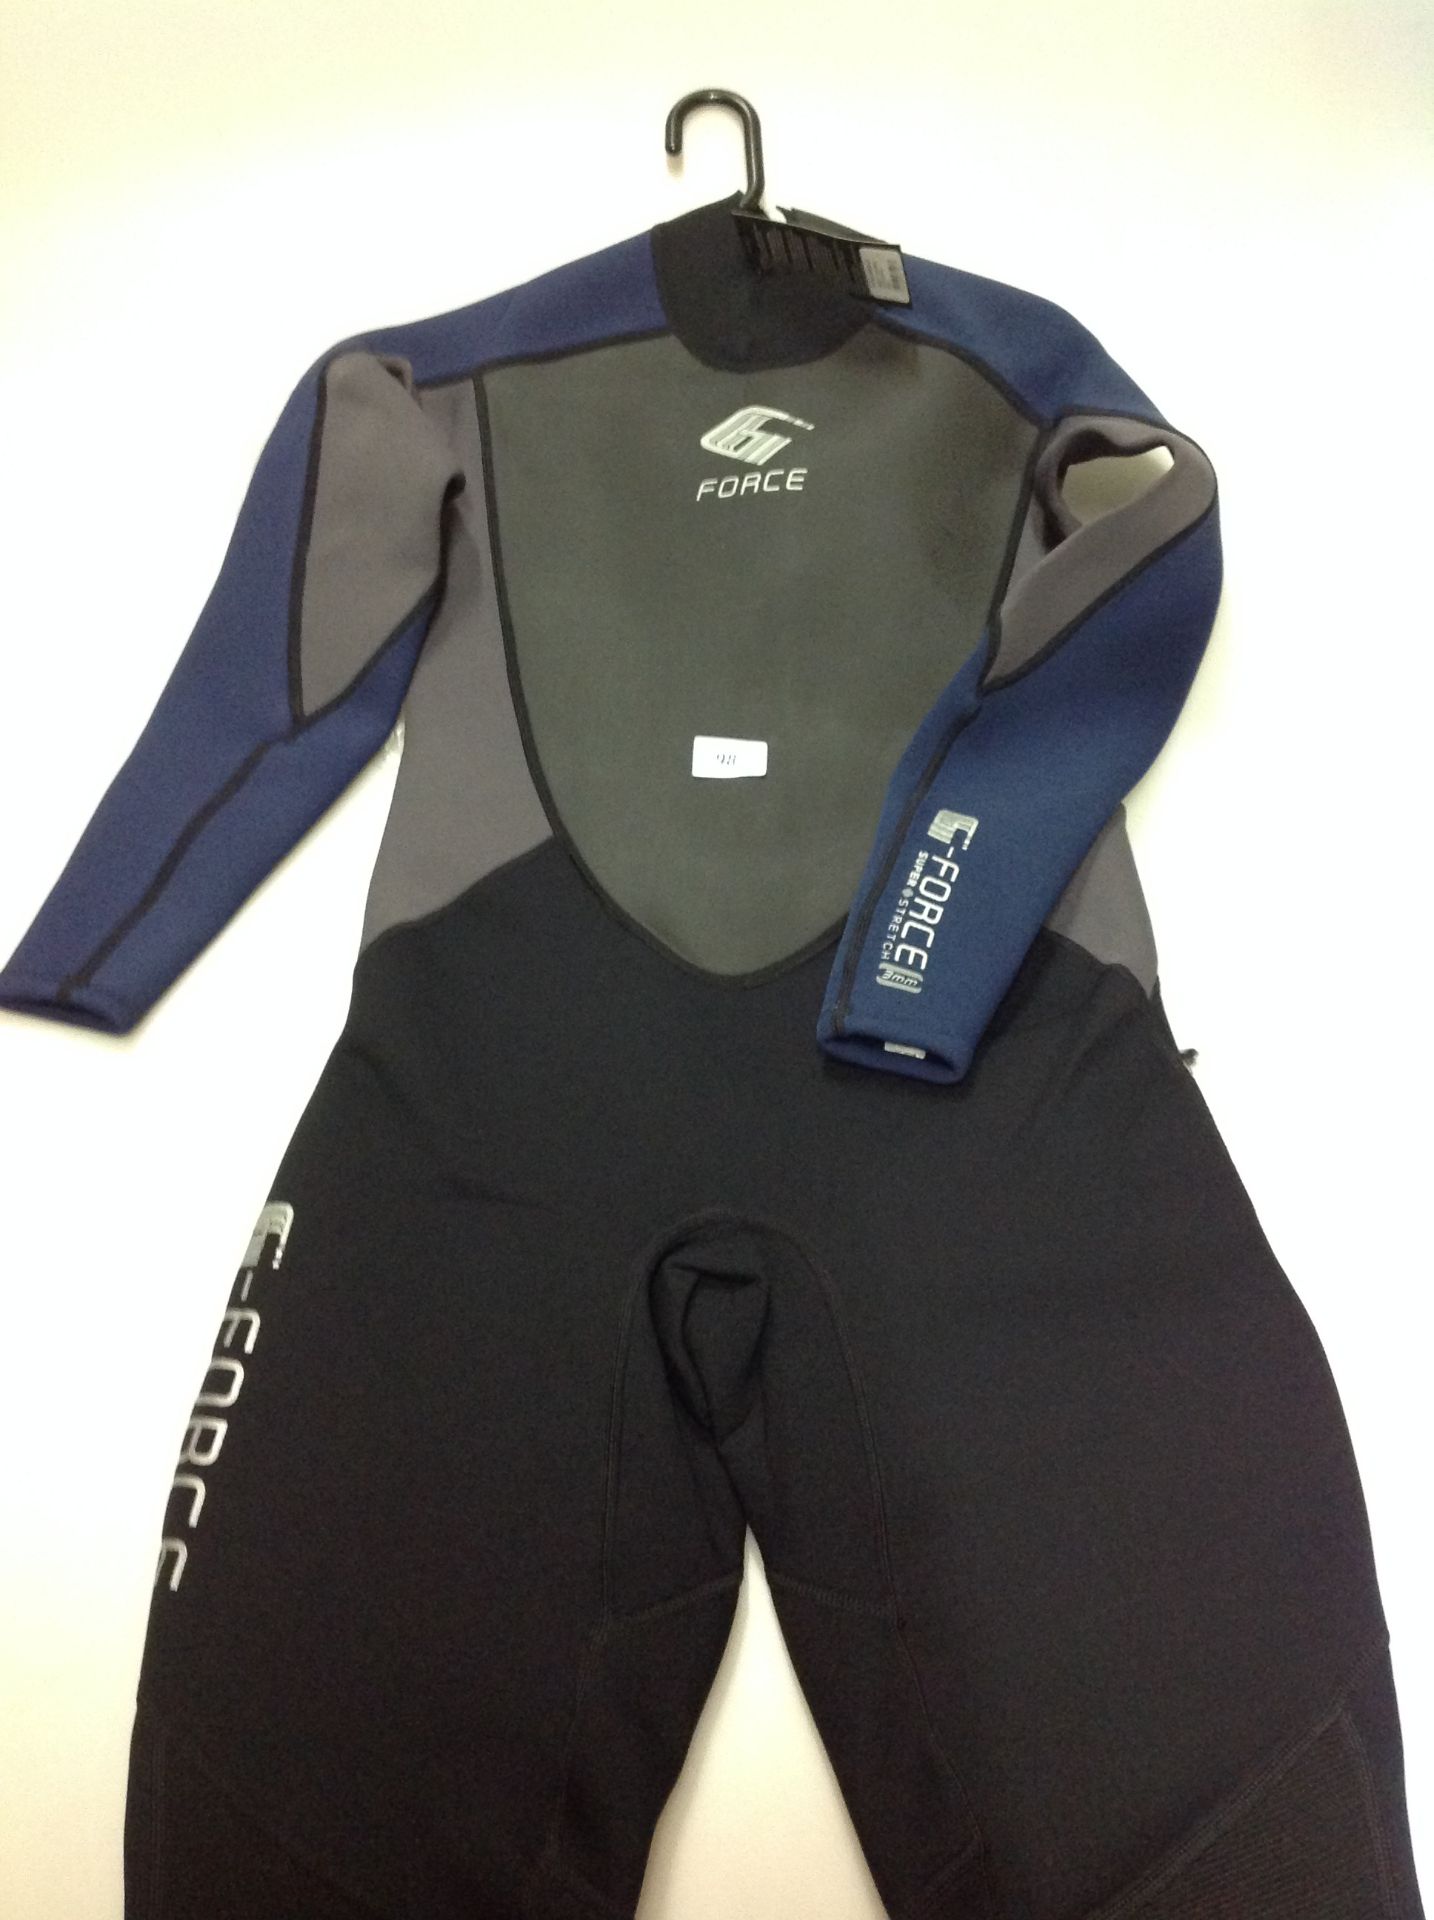 Gul G-Force 3mm wetsuit size MS